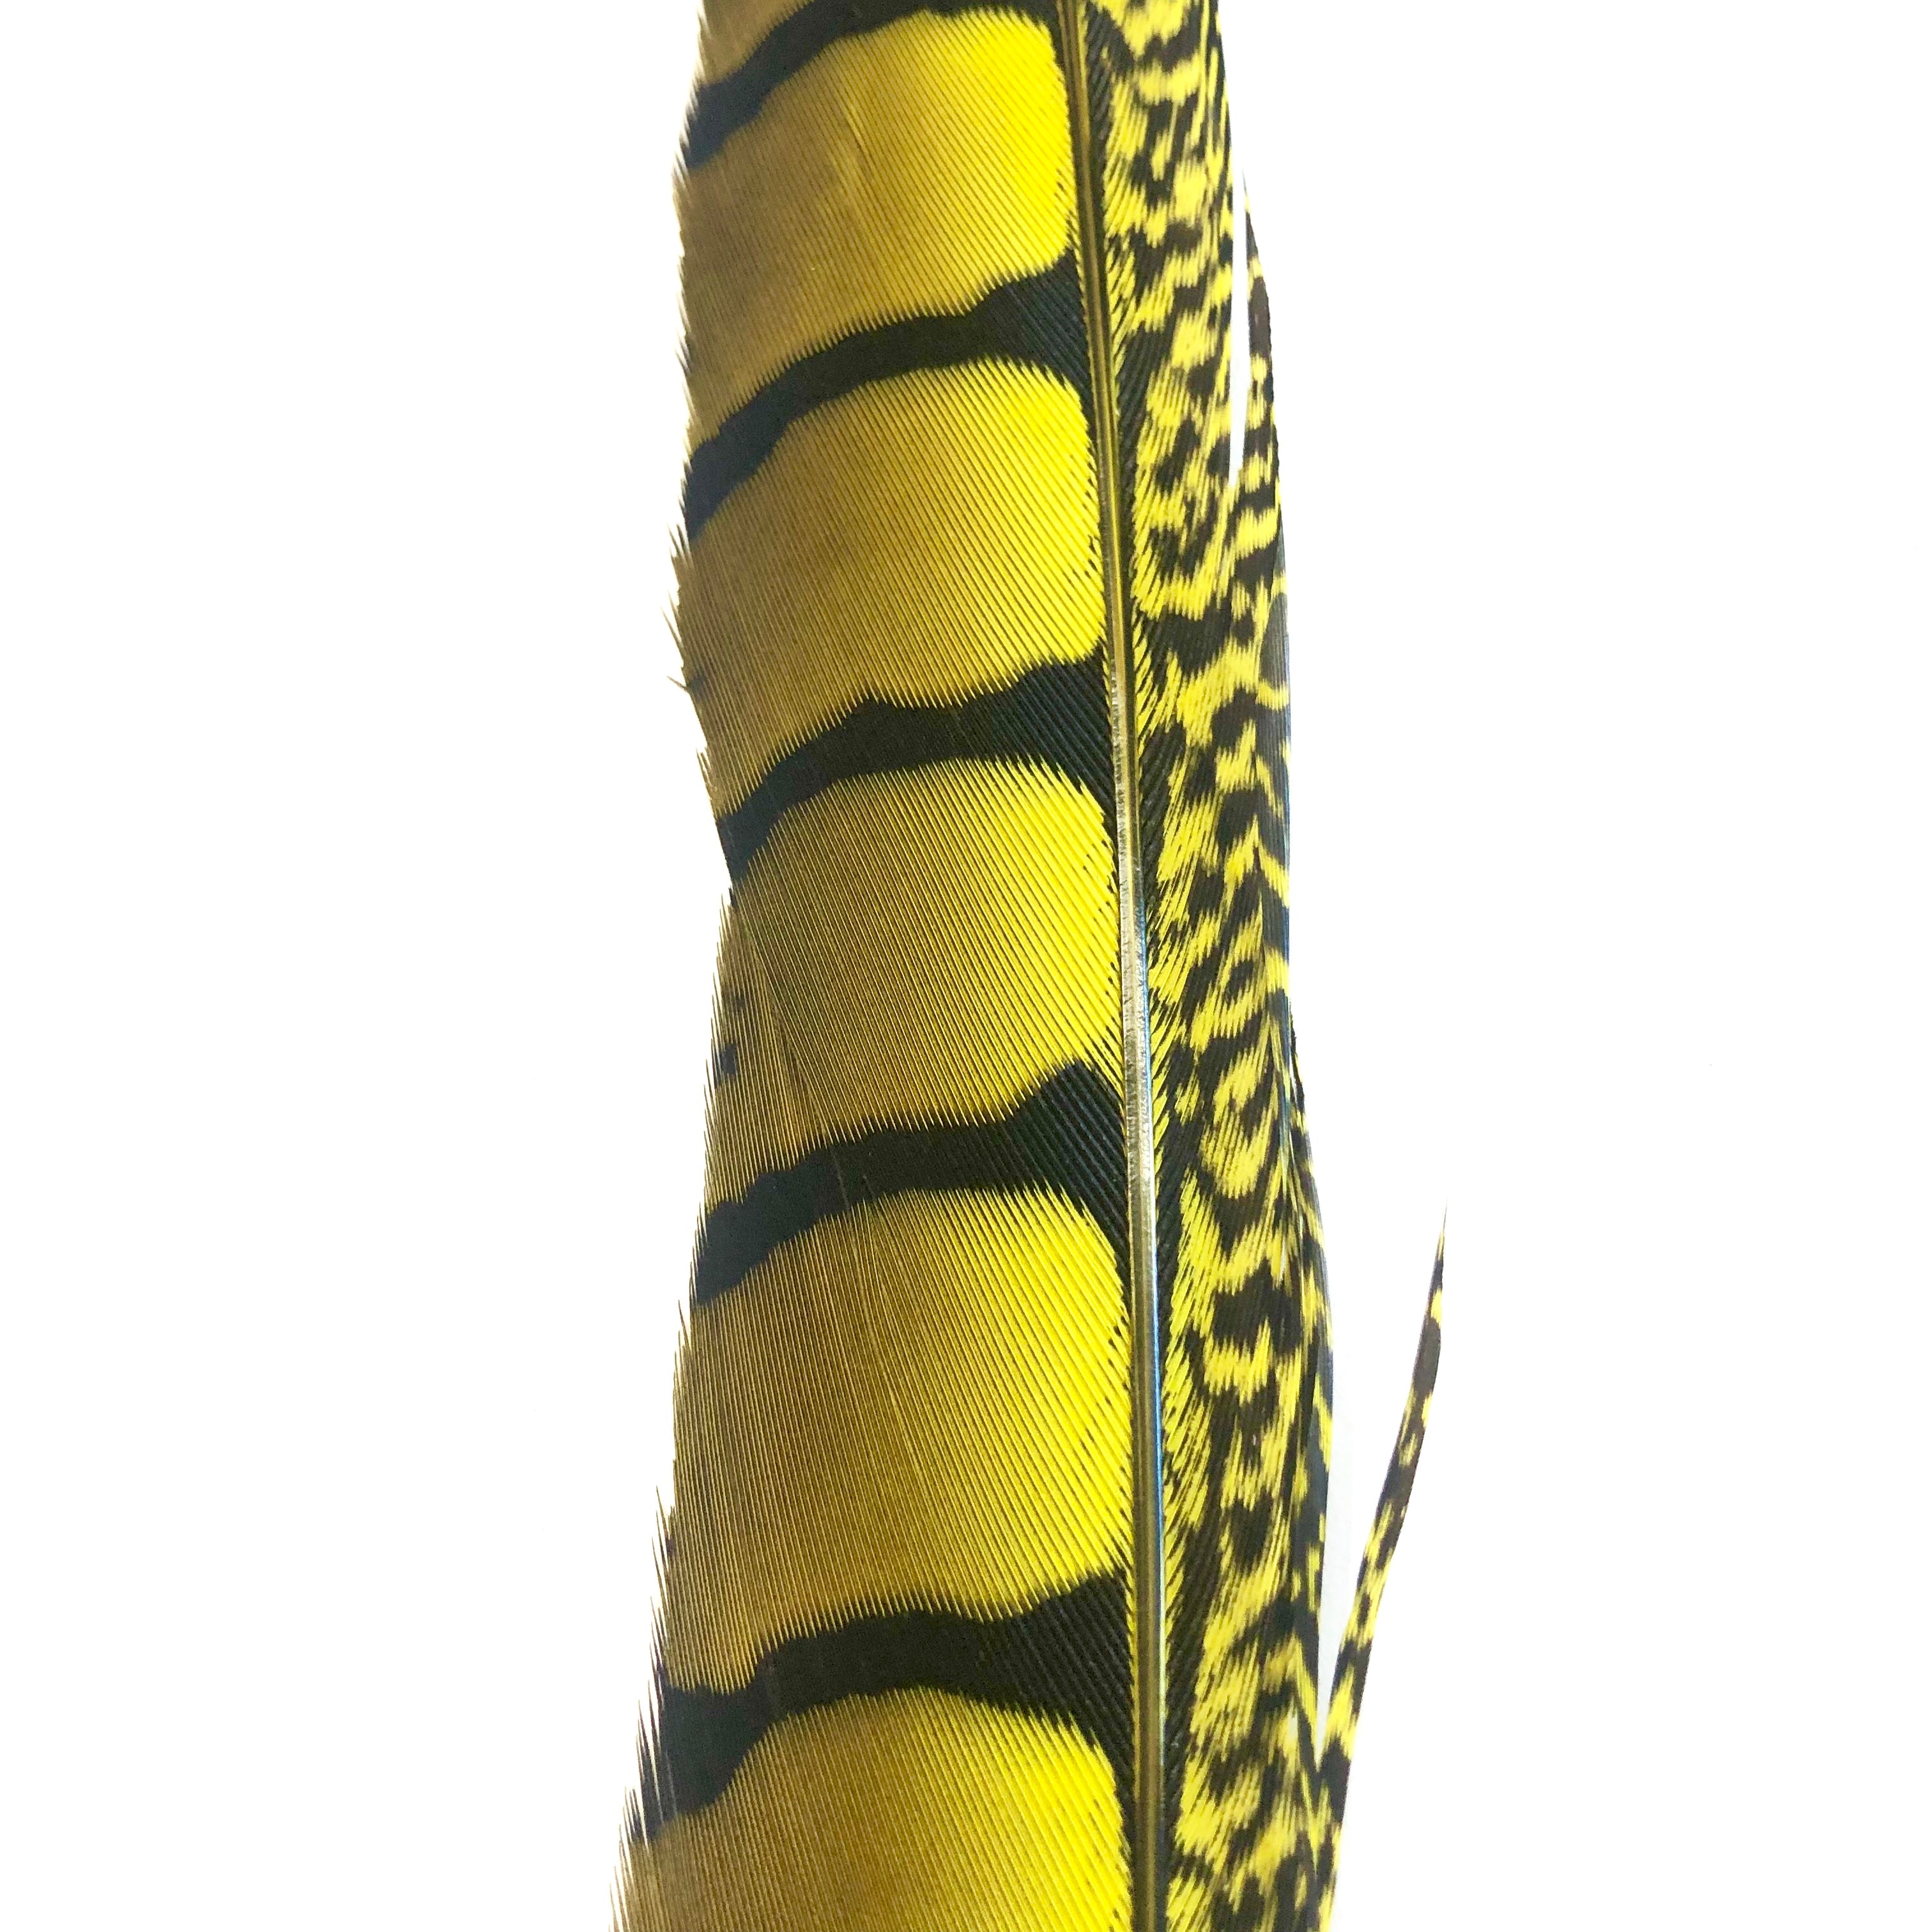 30" to 38" Lady Amherst Pheasant Side Tail Feather - Yellow